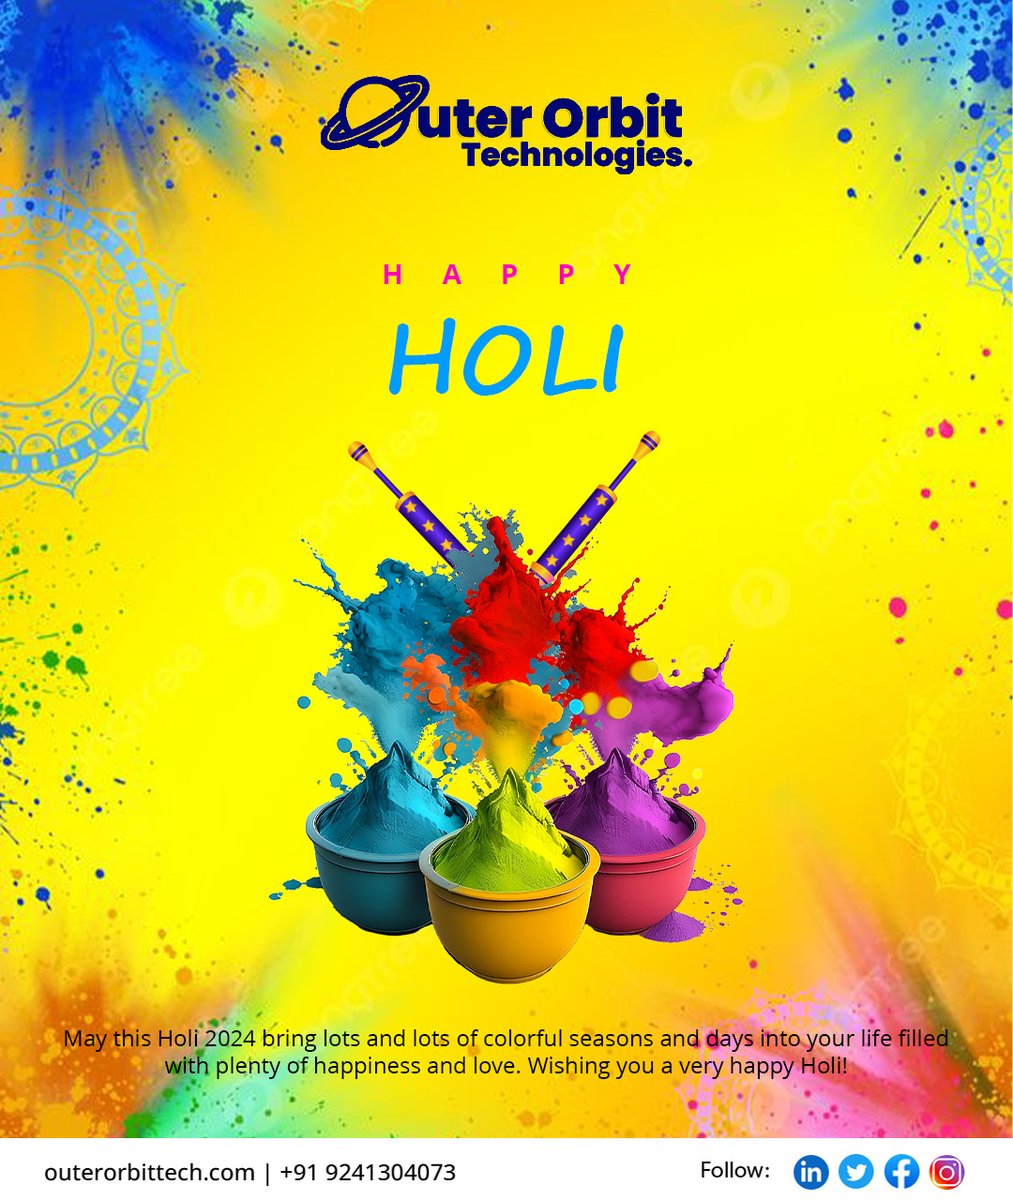 May the colors of Holi fill your life with joy and happiness. 
#HappyHoli #FestivalOfColors #HoliCelebration #ColorfulMoments #JoyfulVibes #HoliFestival #SpreadLoveAndColors #outerorbittech